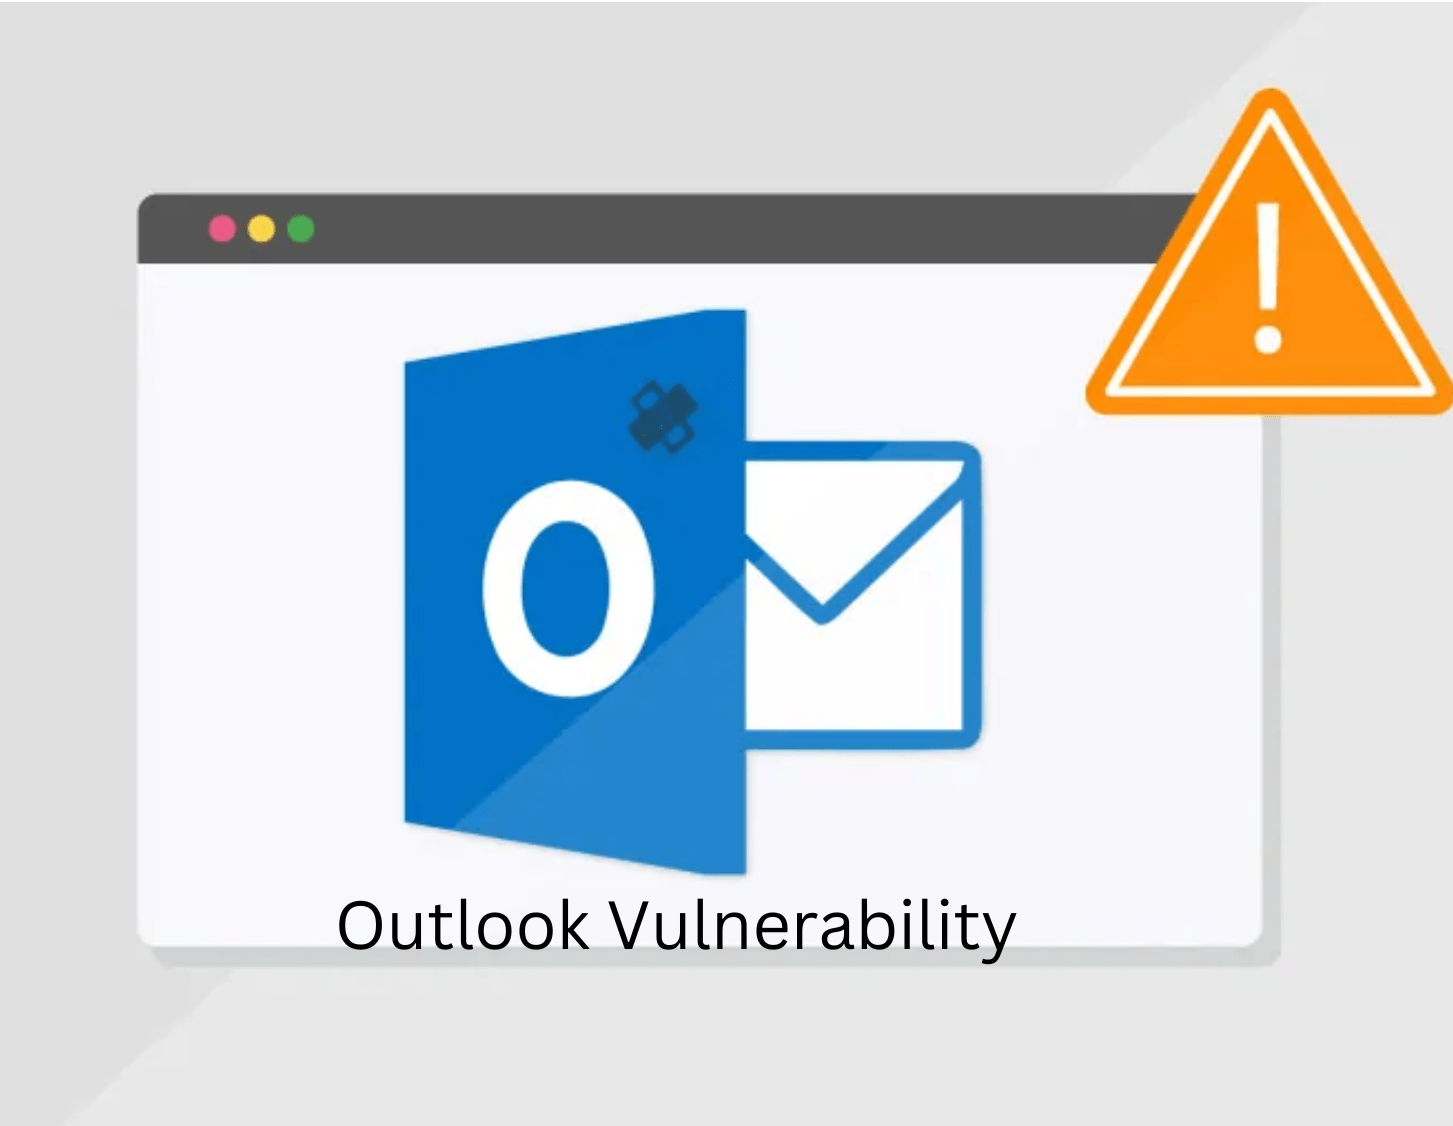 Outlook Vulnerability Exploited by Hackers - Microsoft Warns